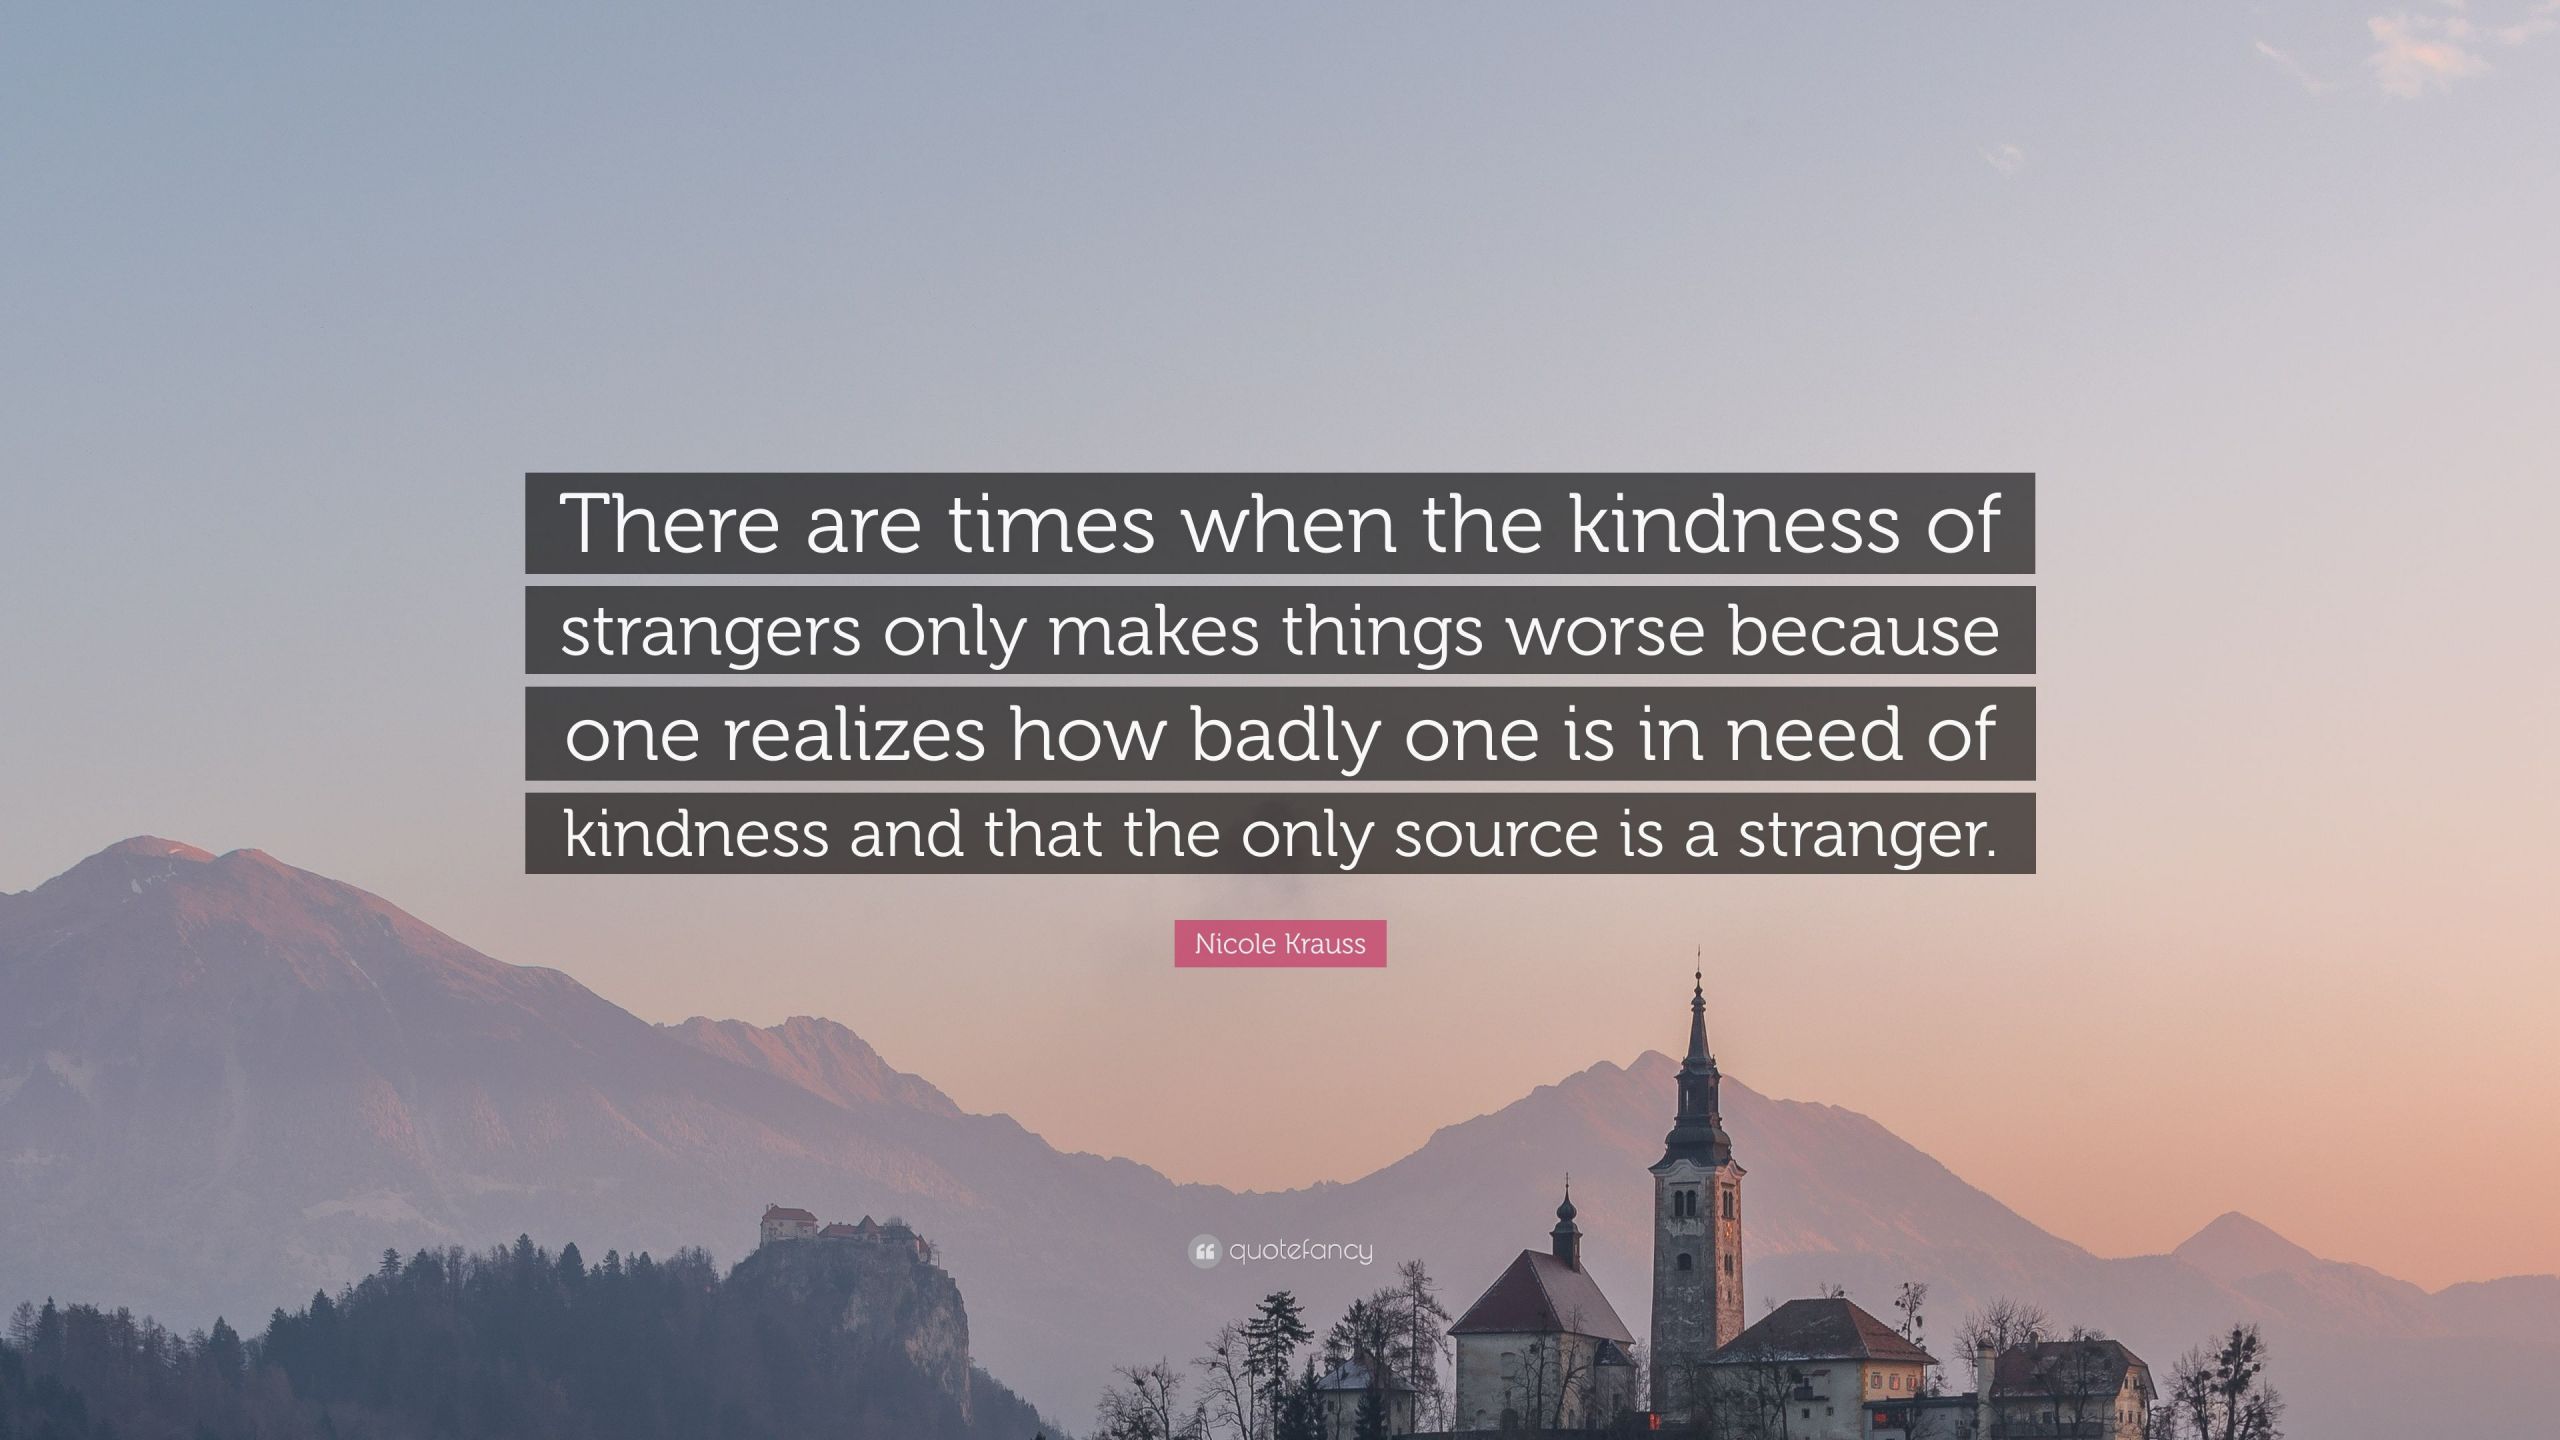 Kindness Of Strangers Quote
 Nicole Krauss Quote “There are times when the kindness of